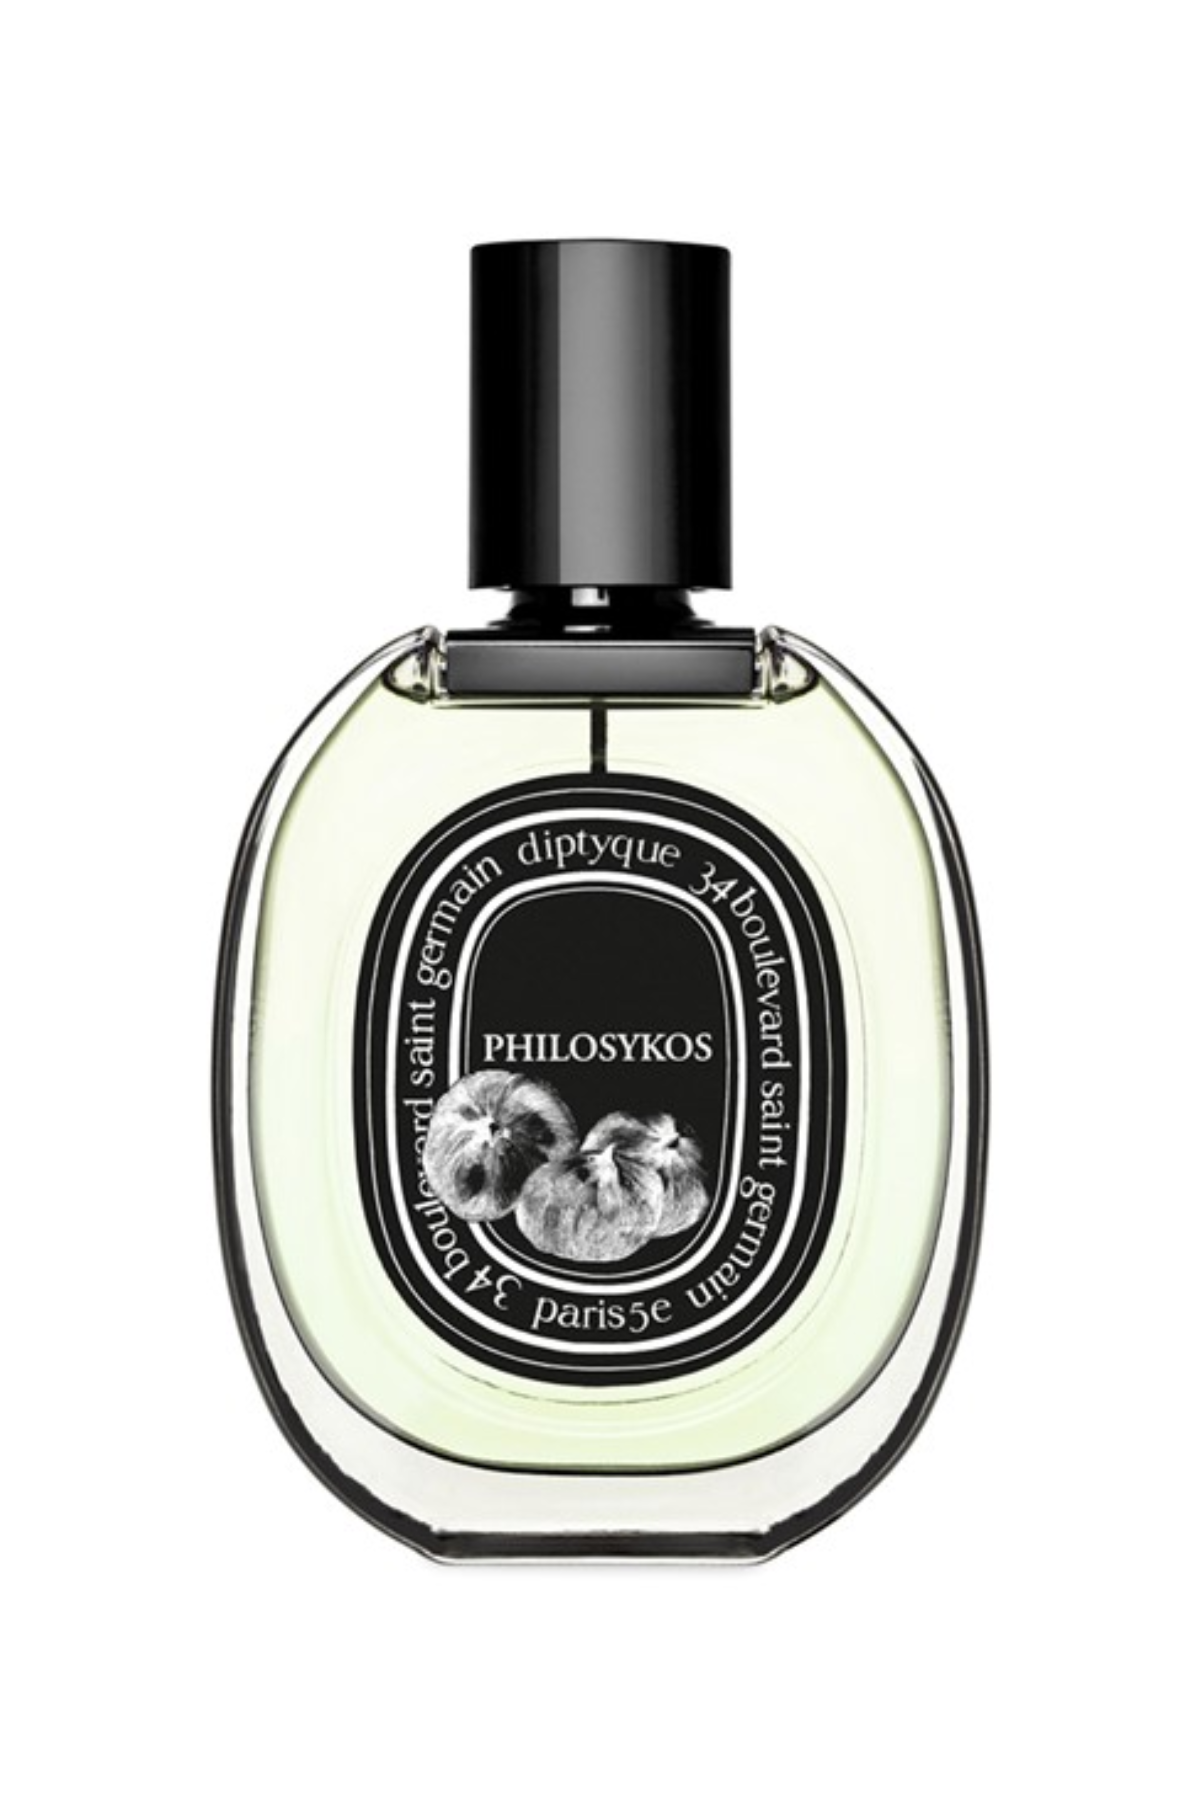 A bottle of Diptyque Philosykos perfume against a white background.